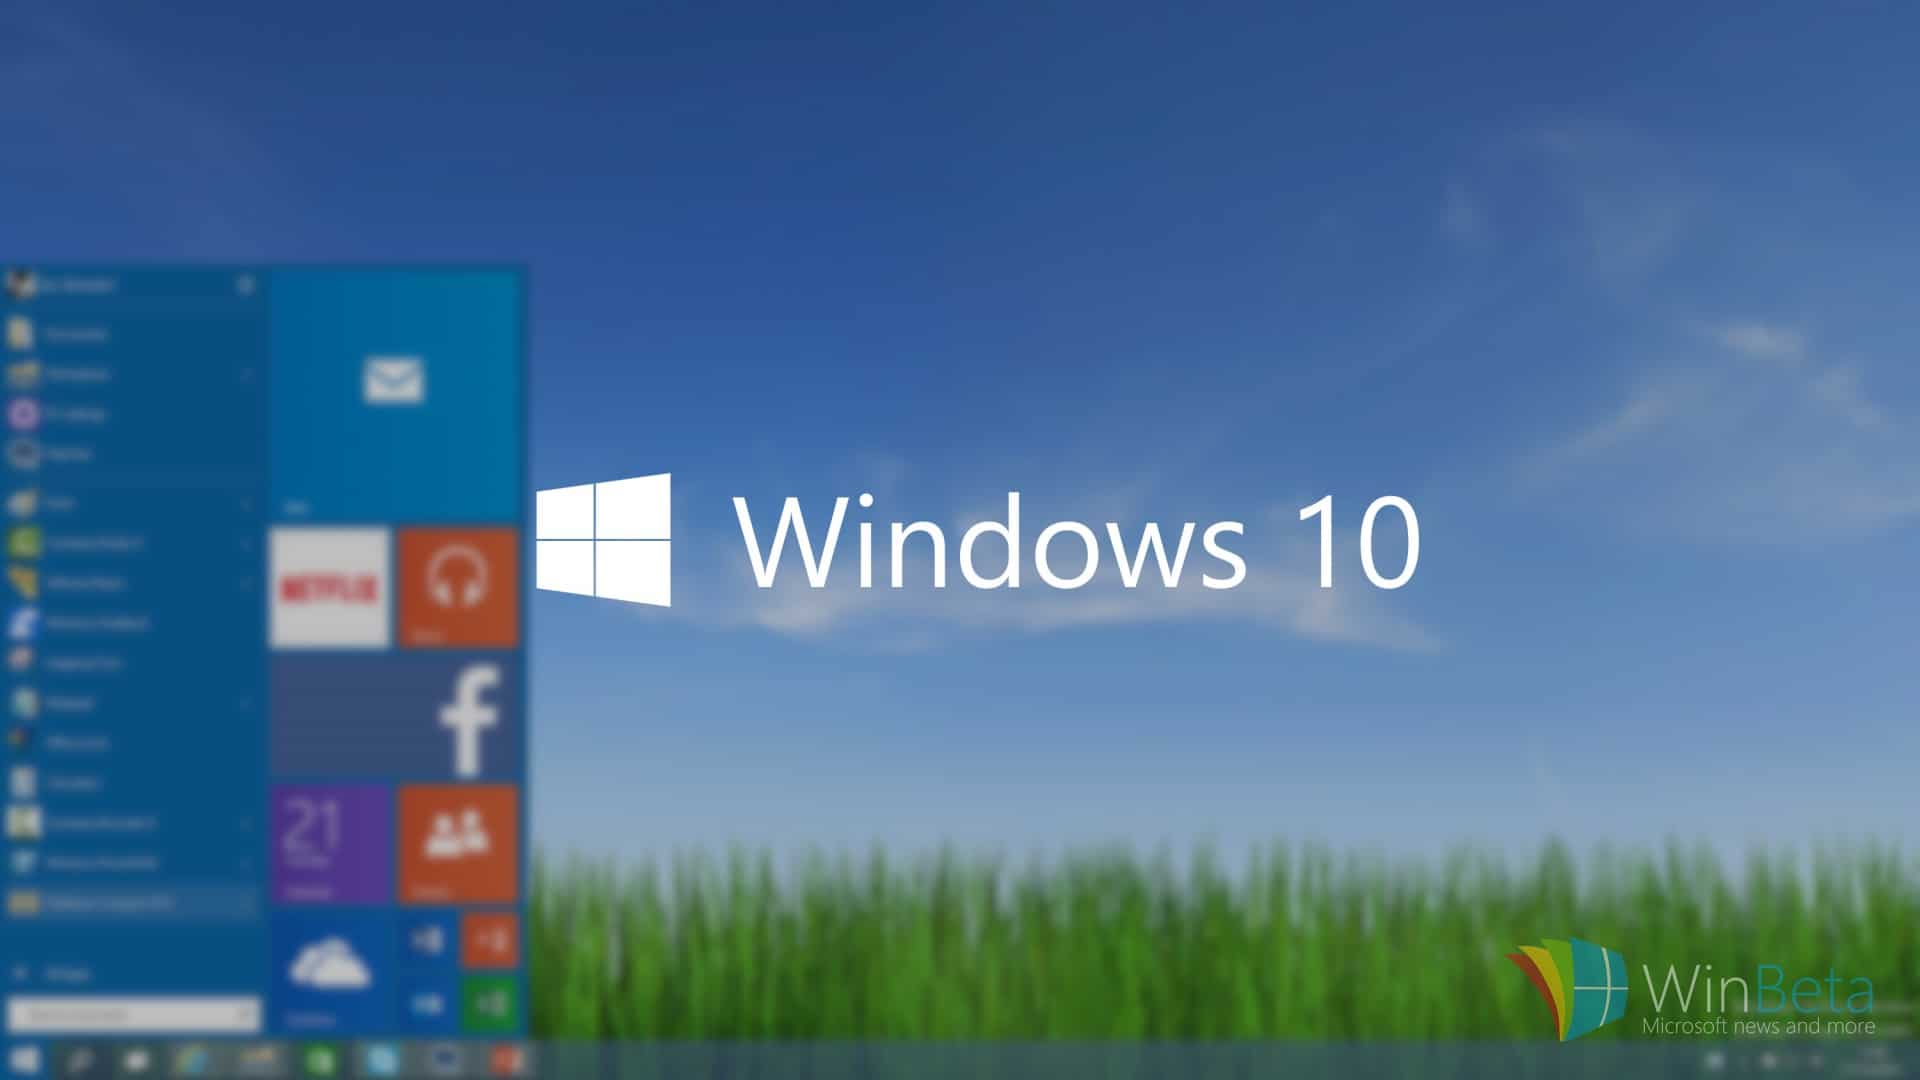 Find your way around Windows 10 with these 3 Essential Tips